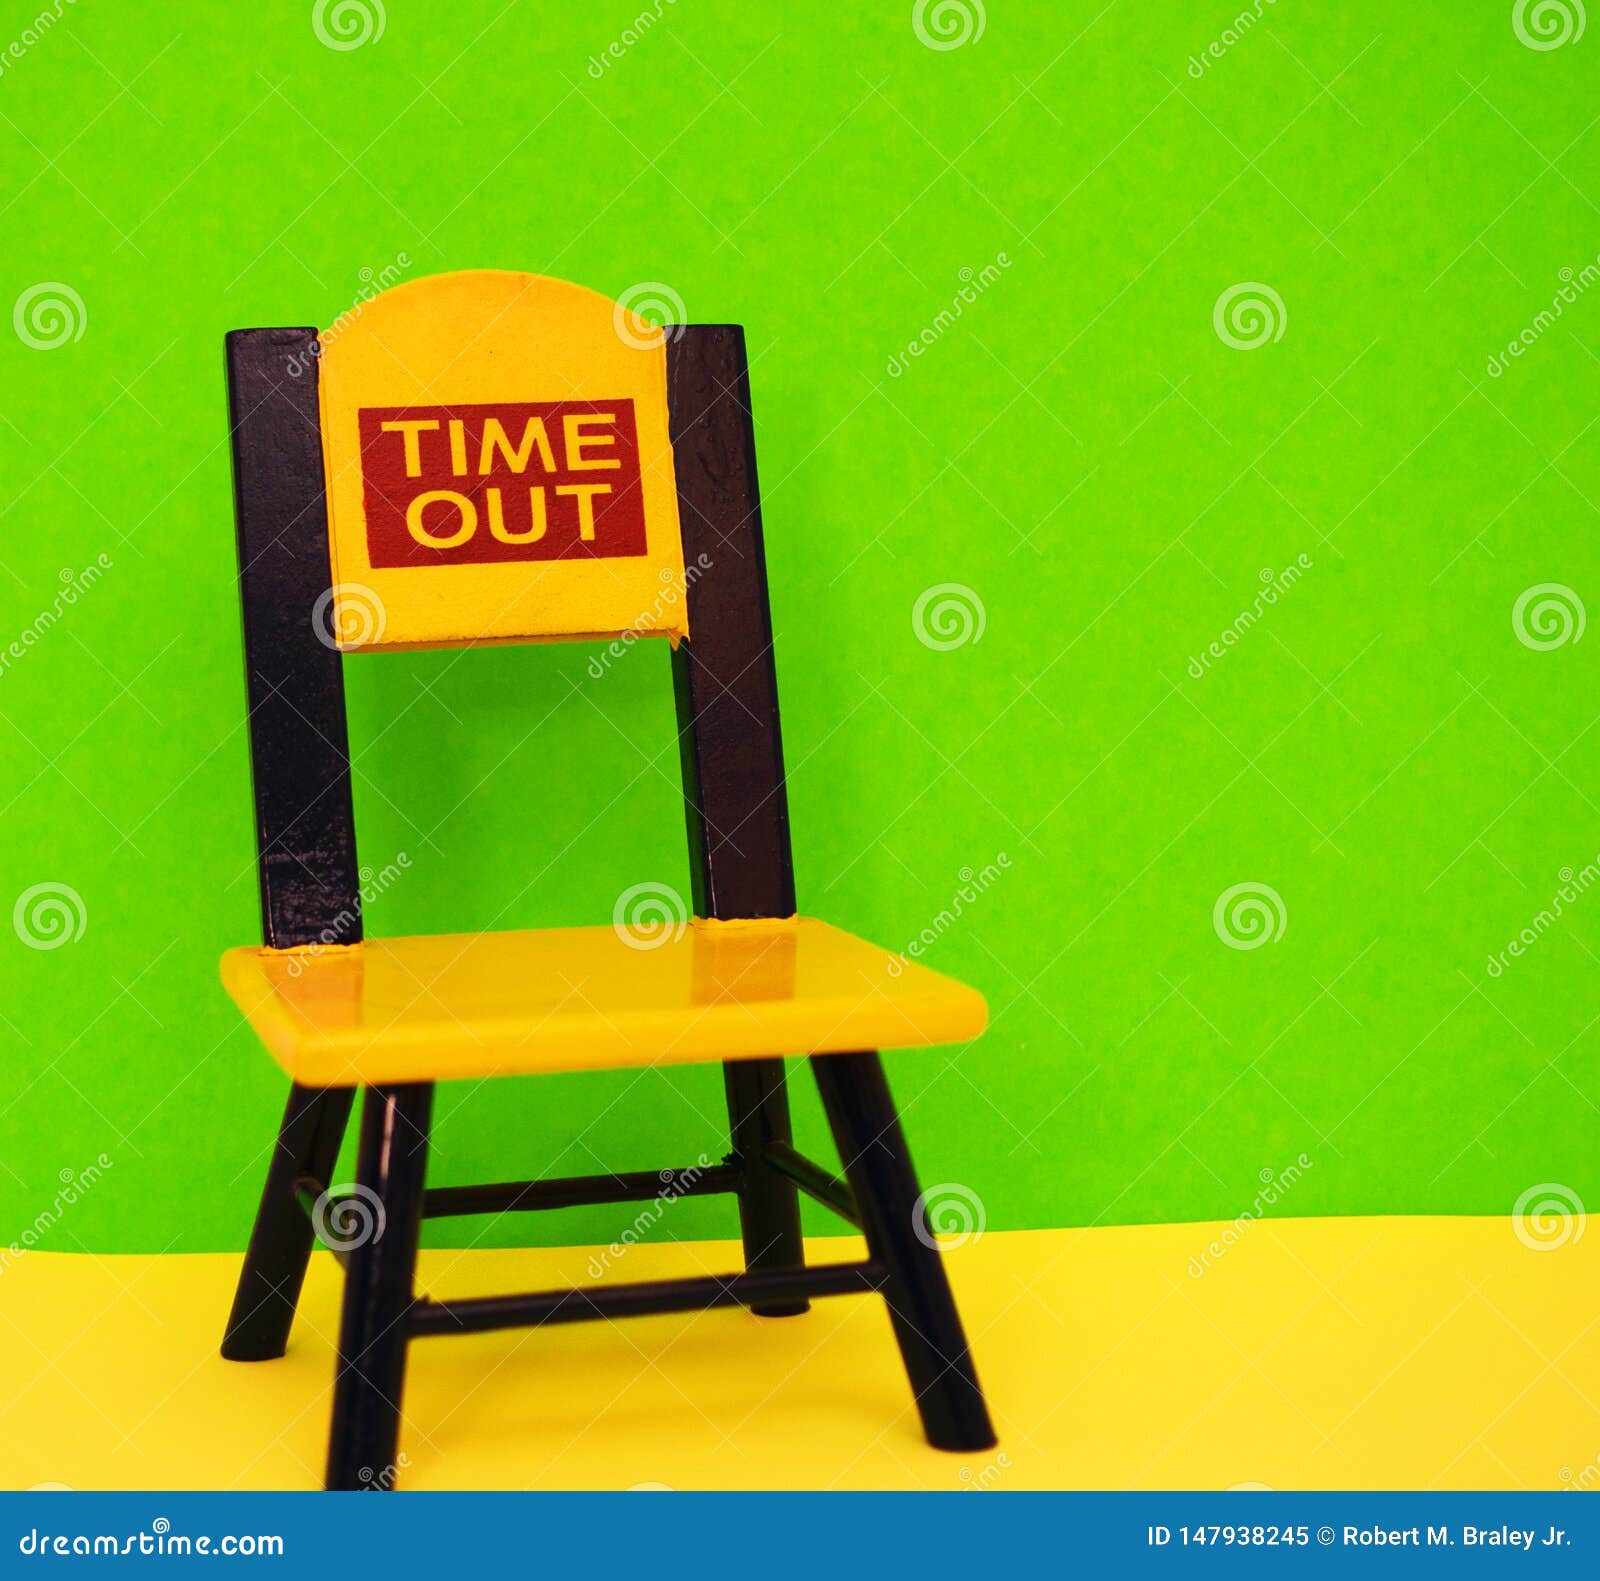 794 time out chair photos  free  royaltyfree stock photos